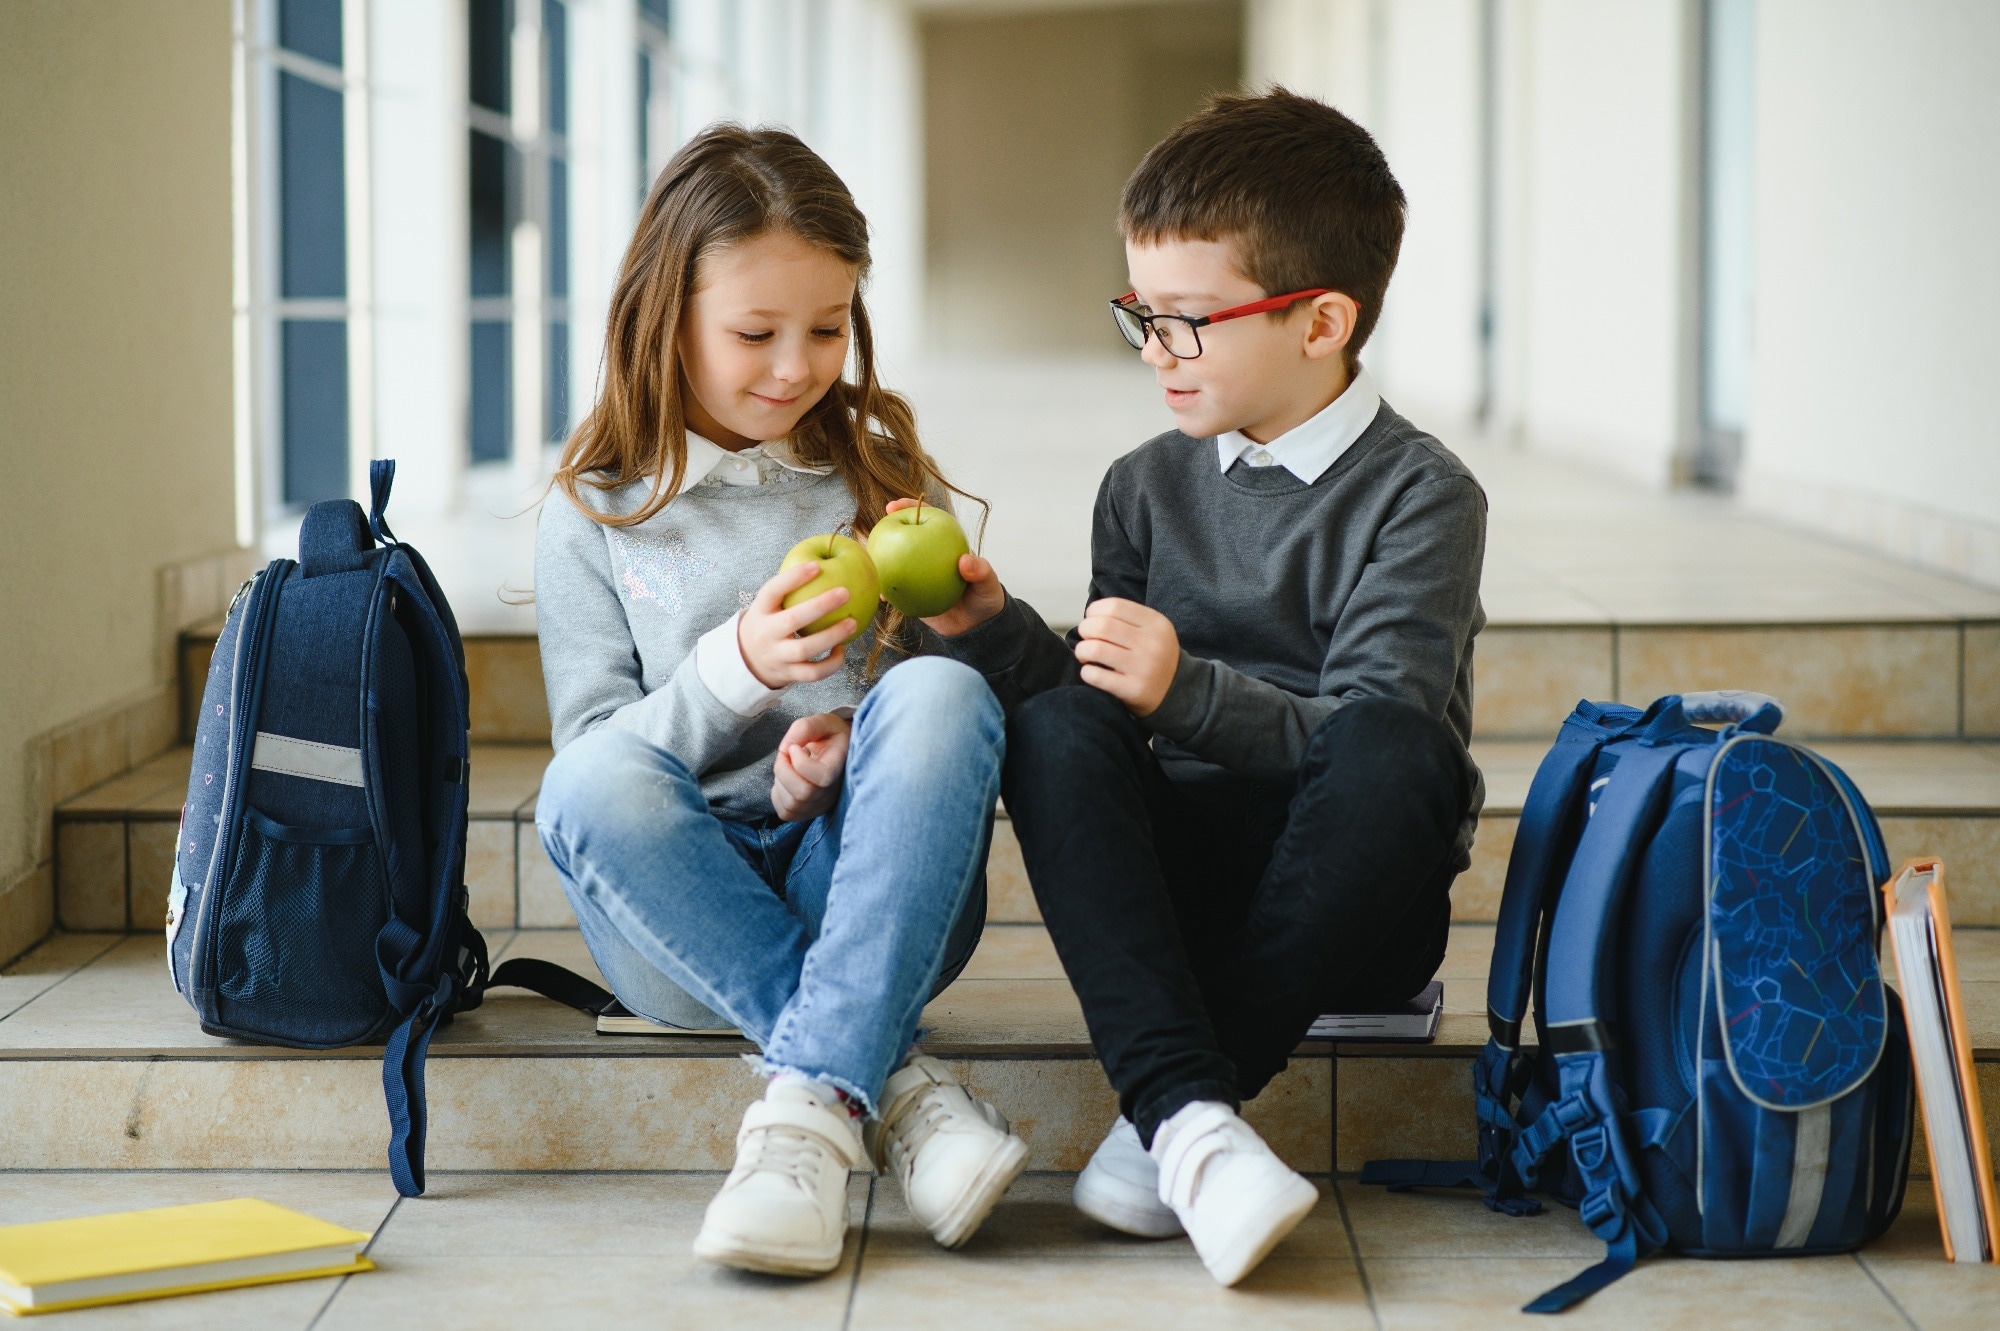 Study: The effect of free school fruit on academic performance: a nationwide quasi-experiment. Image Credit: Hryshchyshen Serhii/Shutterstock.com